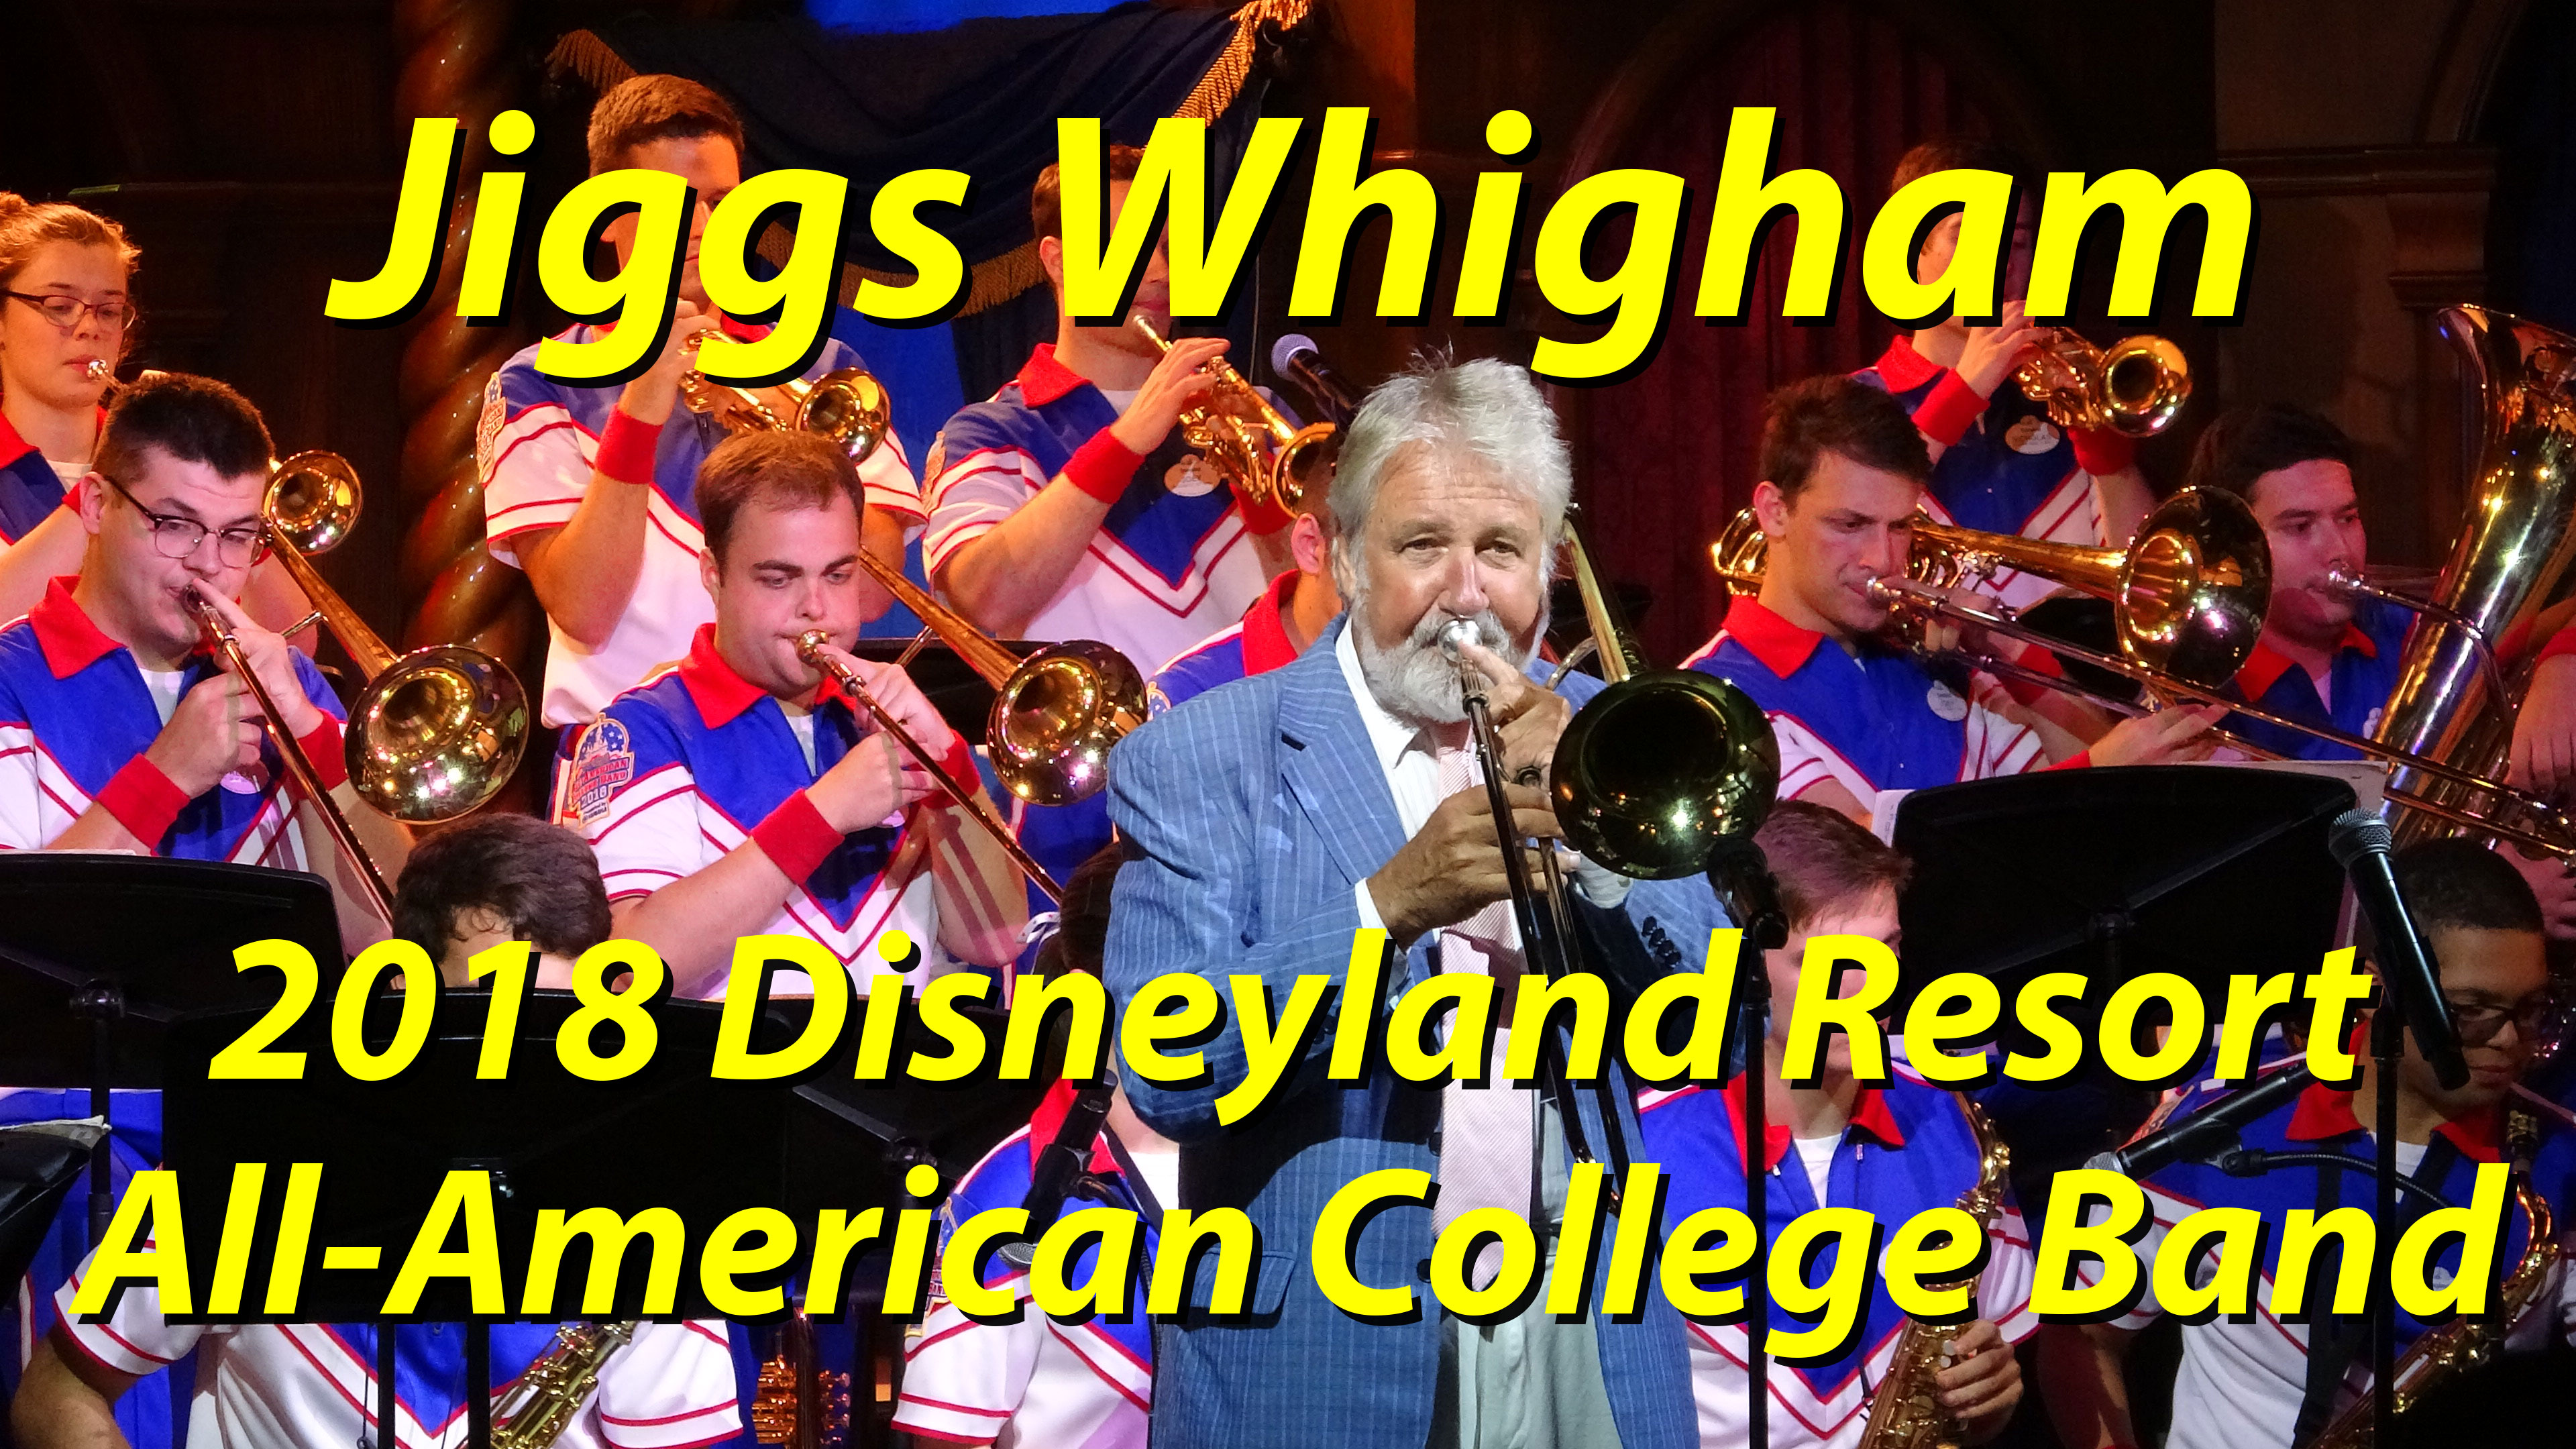 A Night of Humor and Amazing Jazz is Shared by Jiggs Whigham and the 2018 Disneyland Resort All-American College Band